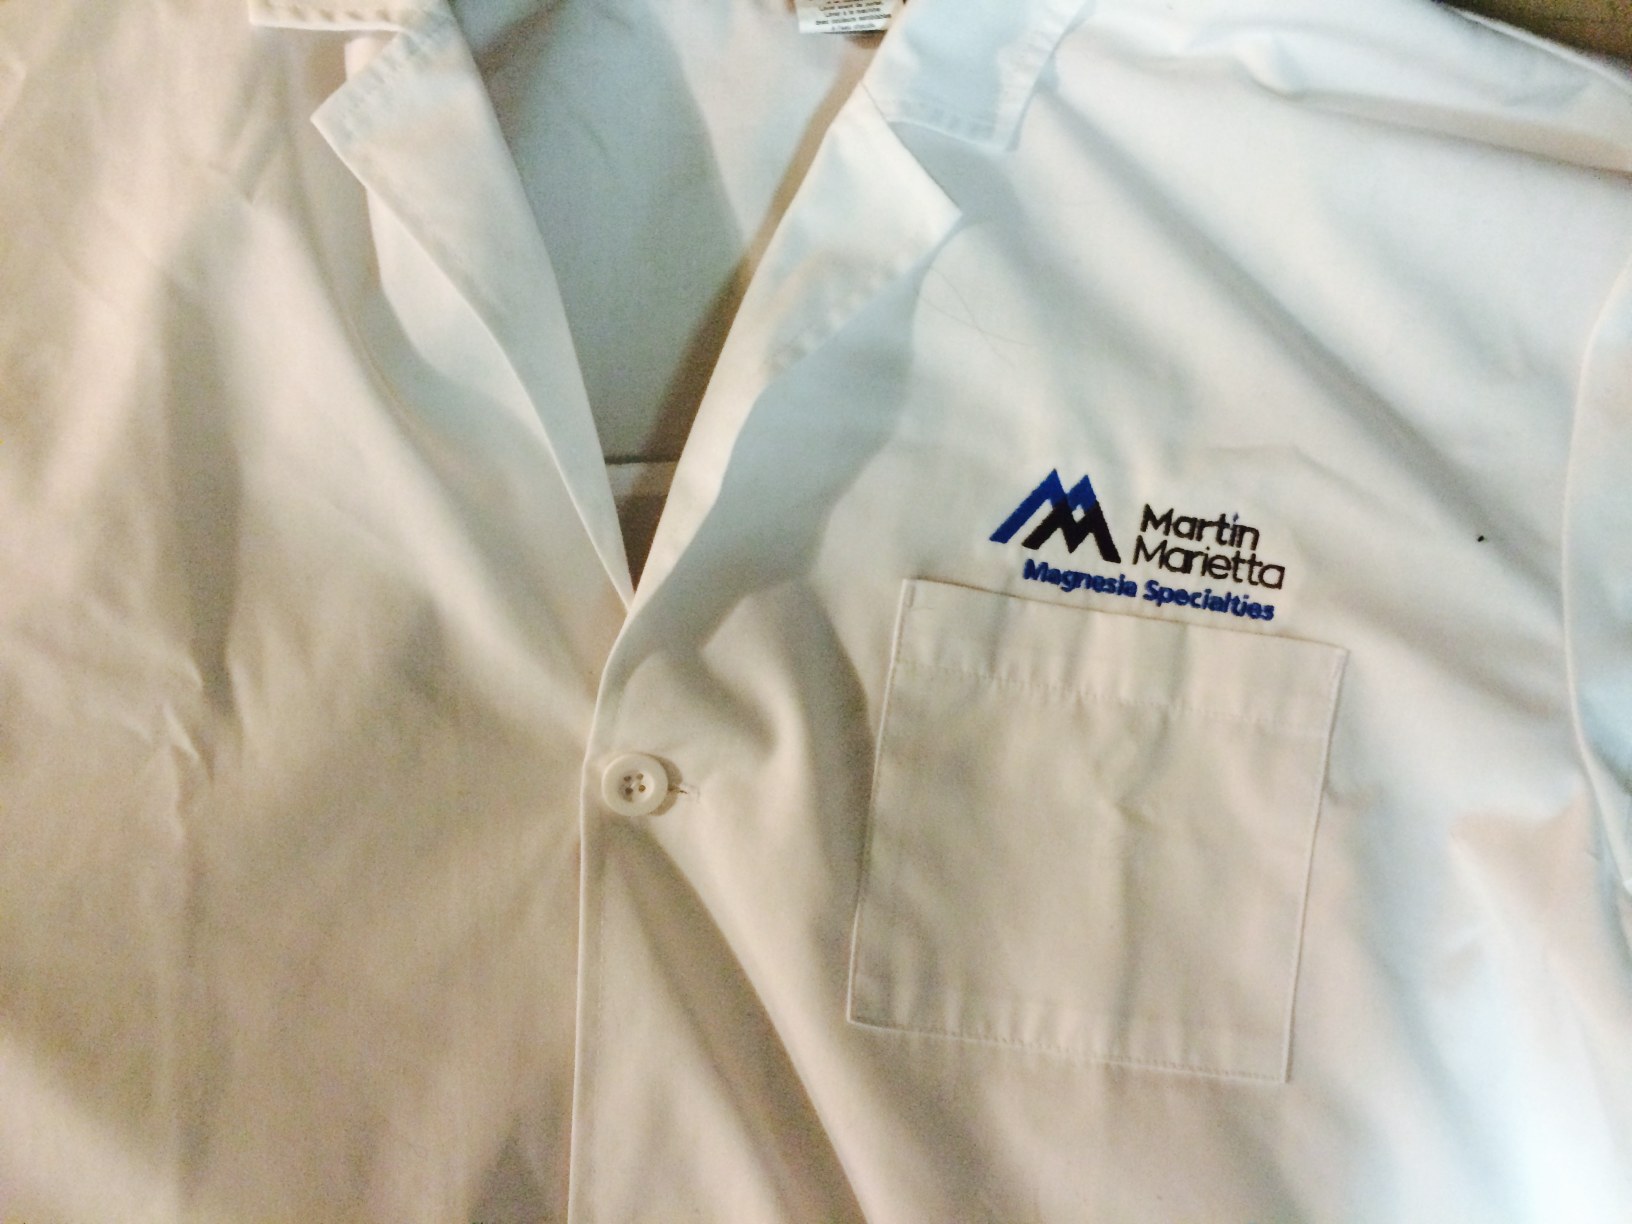 A martin marietta magnesia specialties lab coat with a logo on the pocket, displayed on a flat surface.